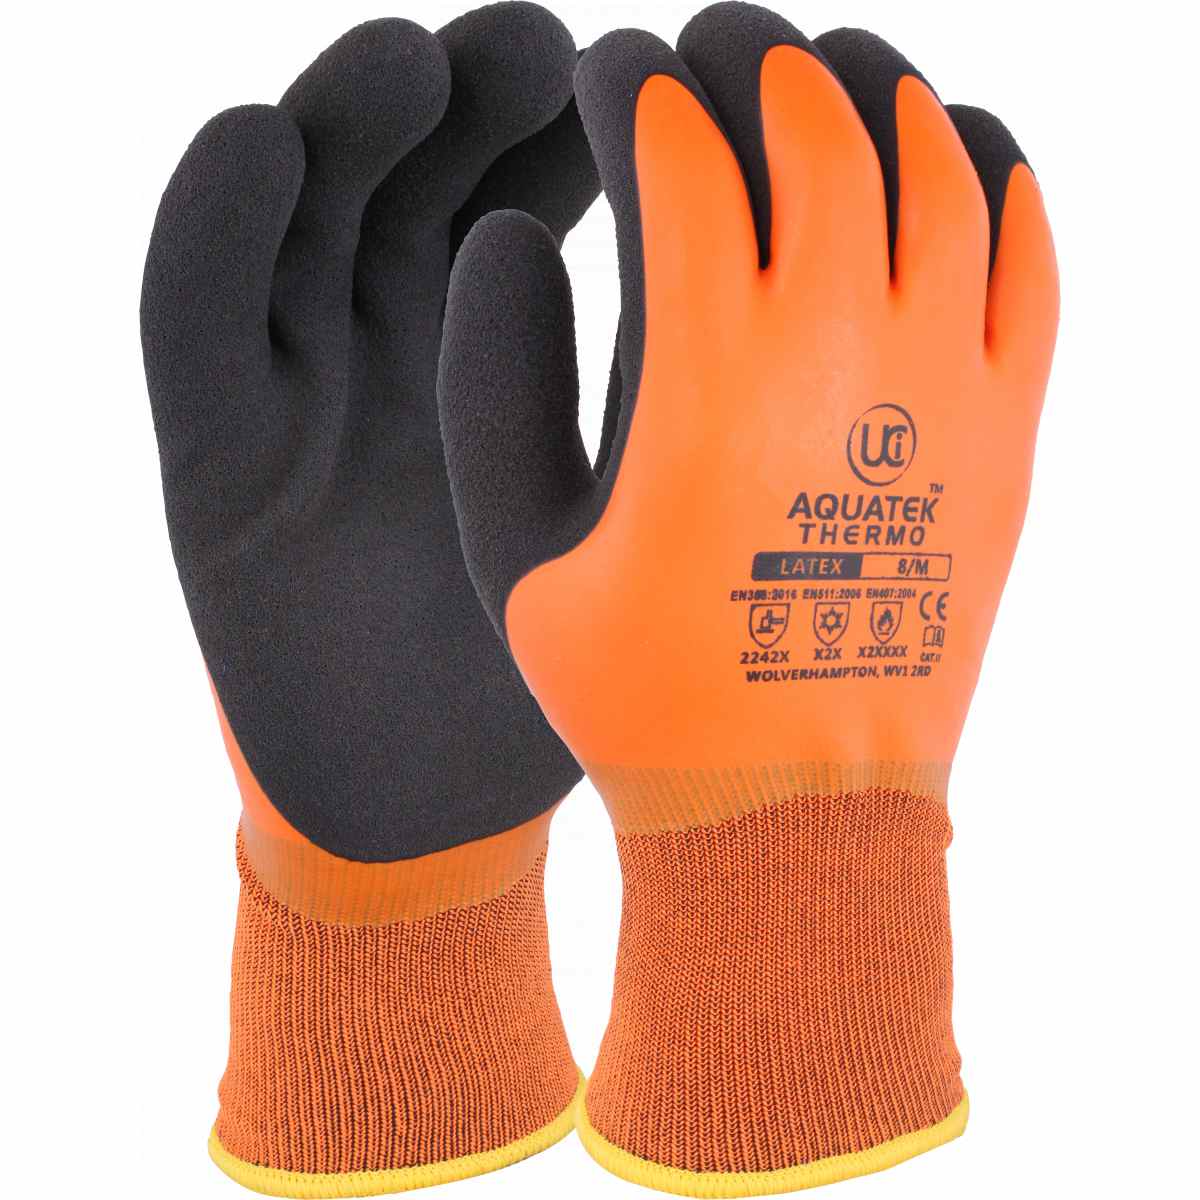 AQUATEC THERMO WATERPROOF GLOVES